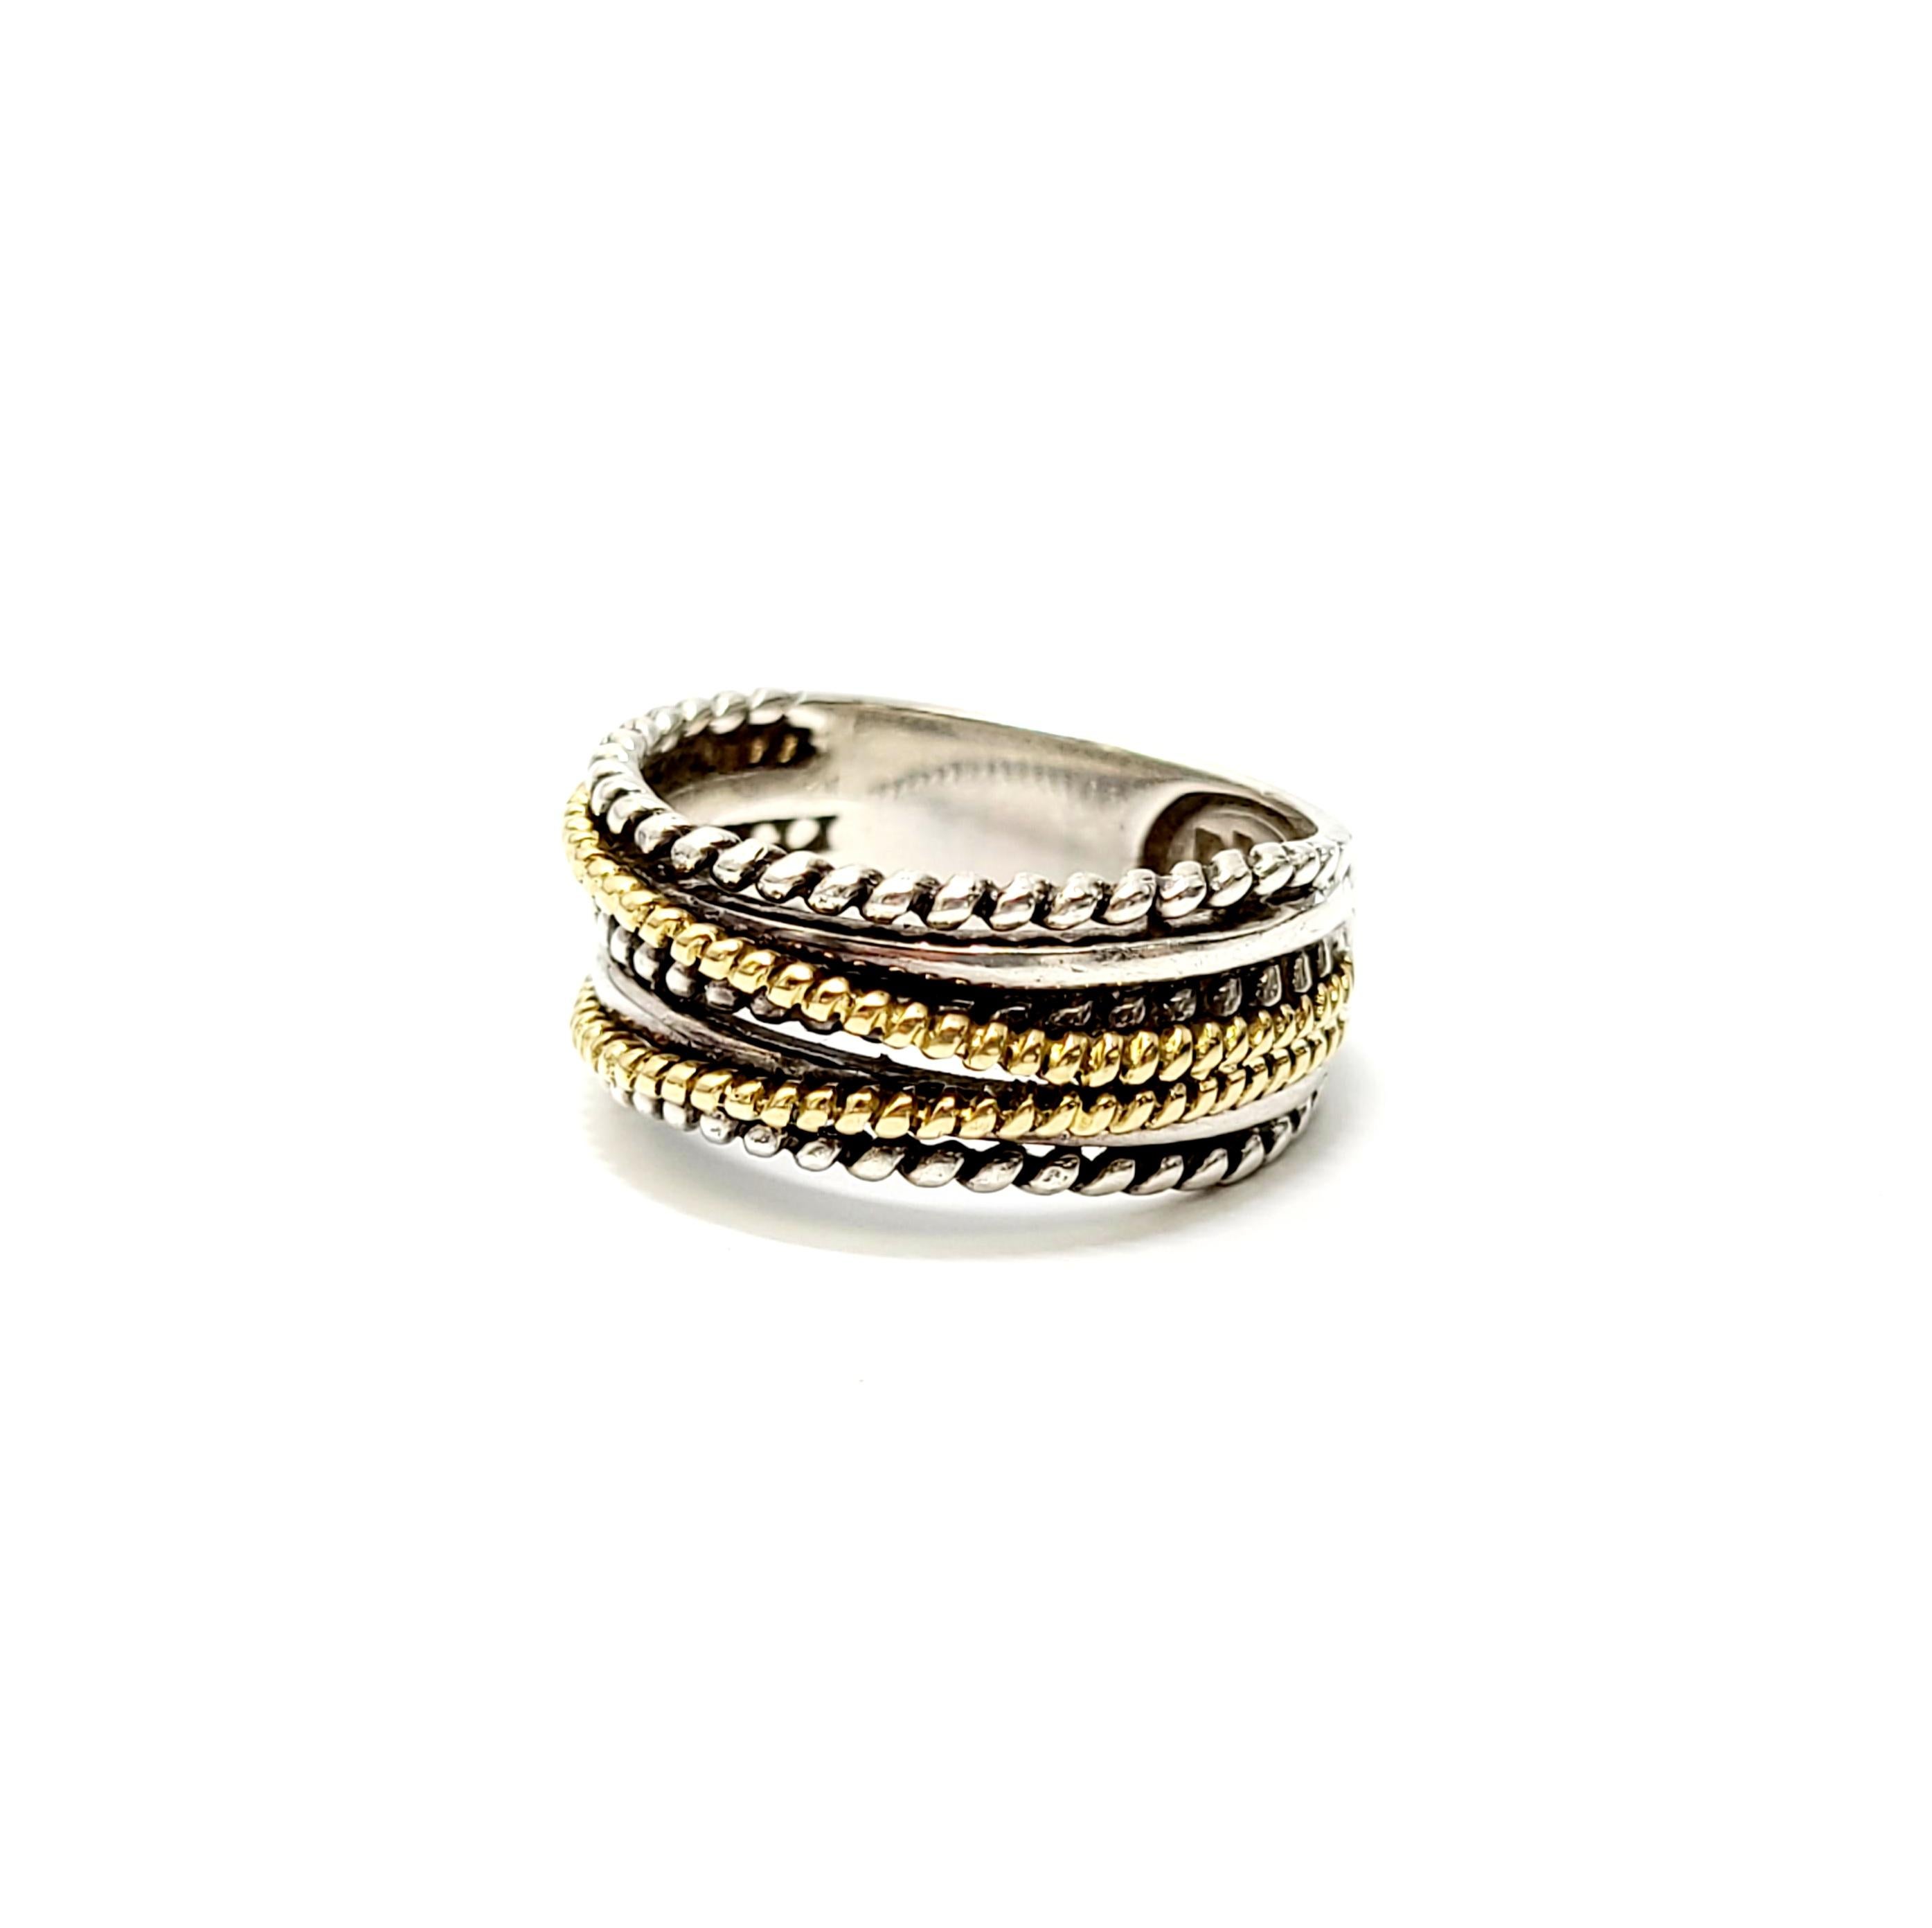 Effy Sterling Silver and 18K Yellow Gold Band Ring

This authentic Effy ring is a size 6.75

Features a twist rope design with 18K yellow gold accents on a sterling silver band.

Front of ring measures 8-9mm in different places.

Stamped EFFY 18K